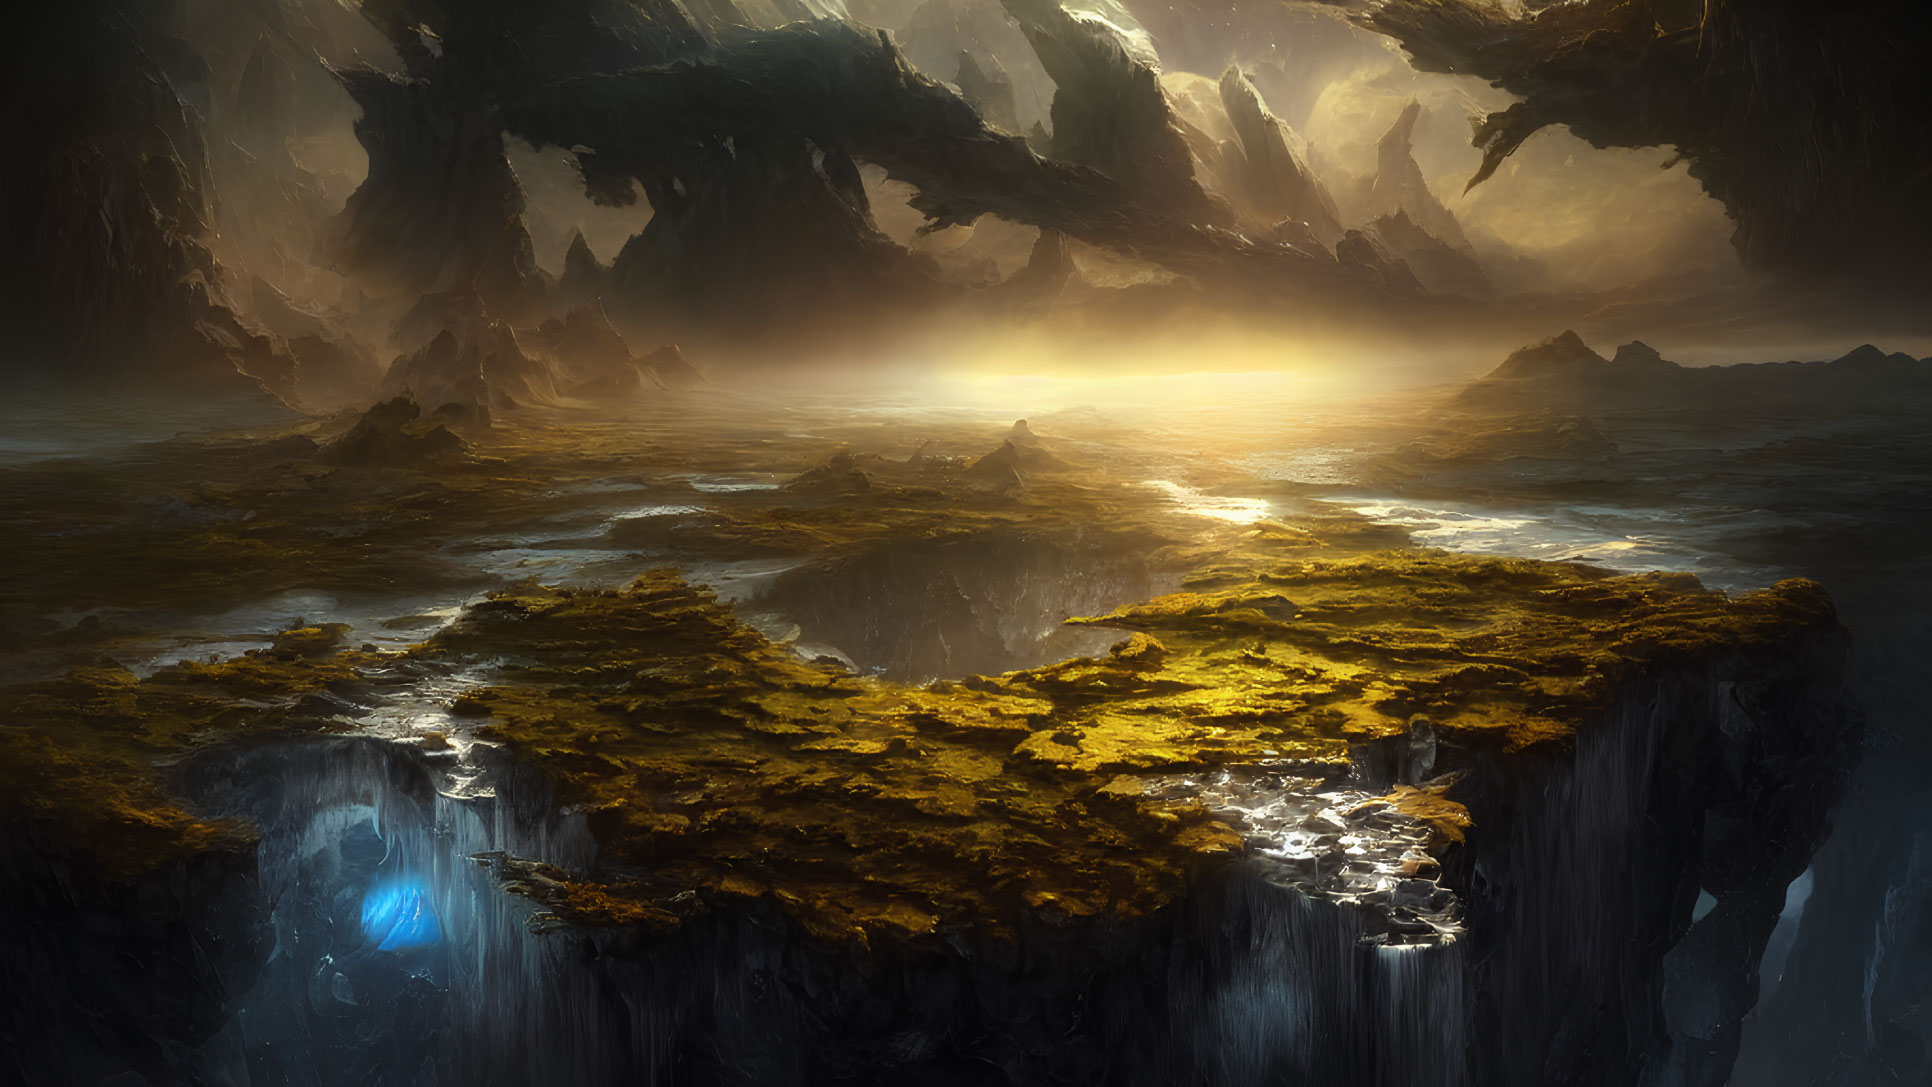 Mystical landscape with towering rock formations and glowing sun over misty waterfalls.